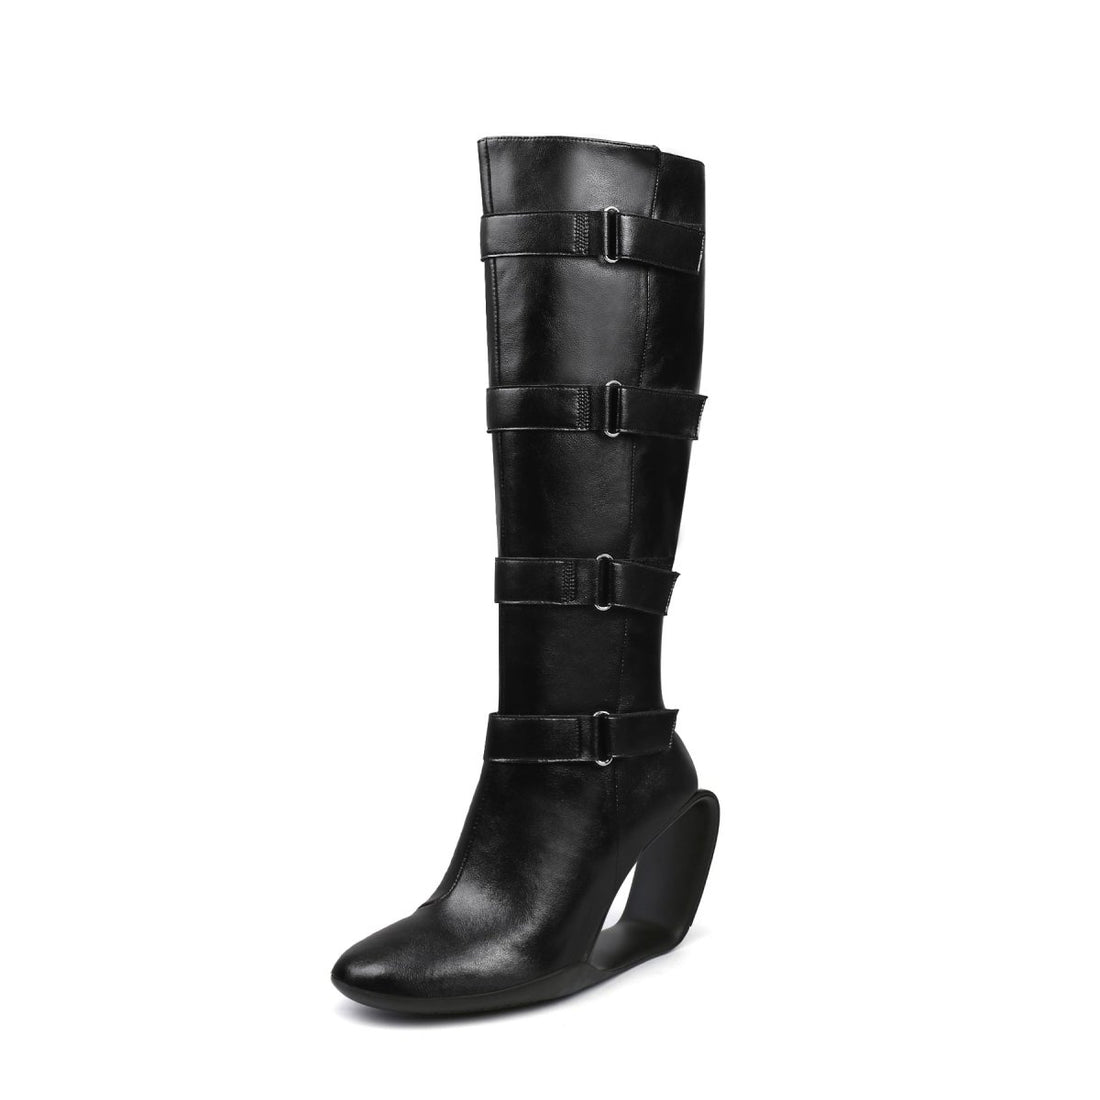 Strap Yourself In Black Knee-High Boots - 0cm